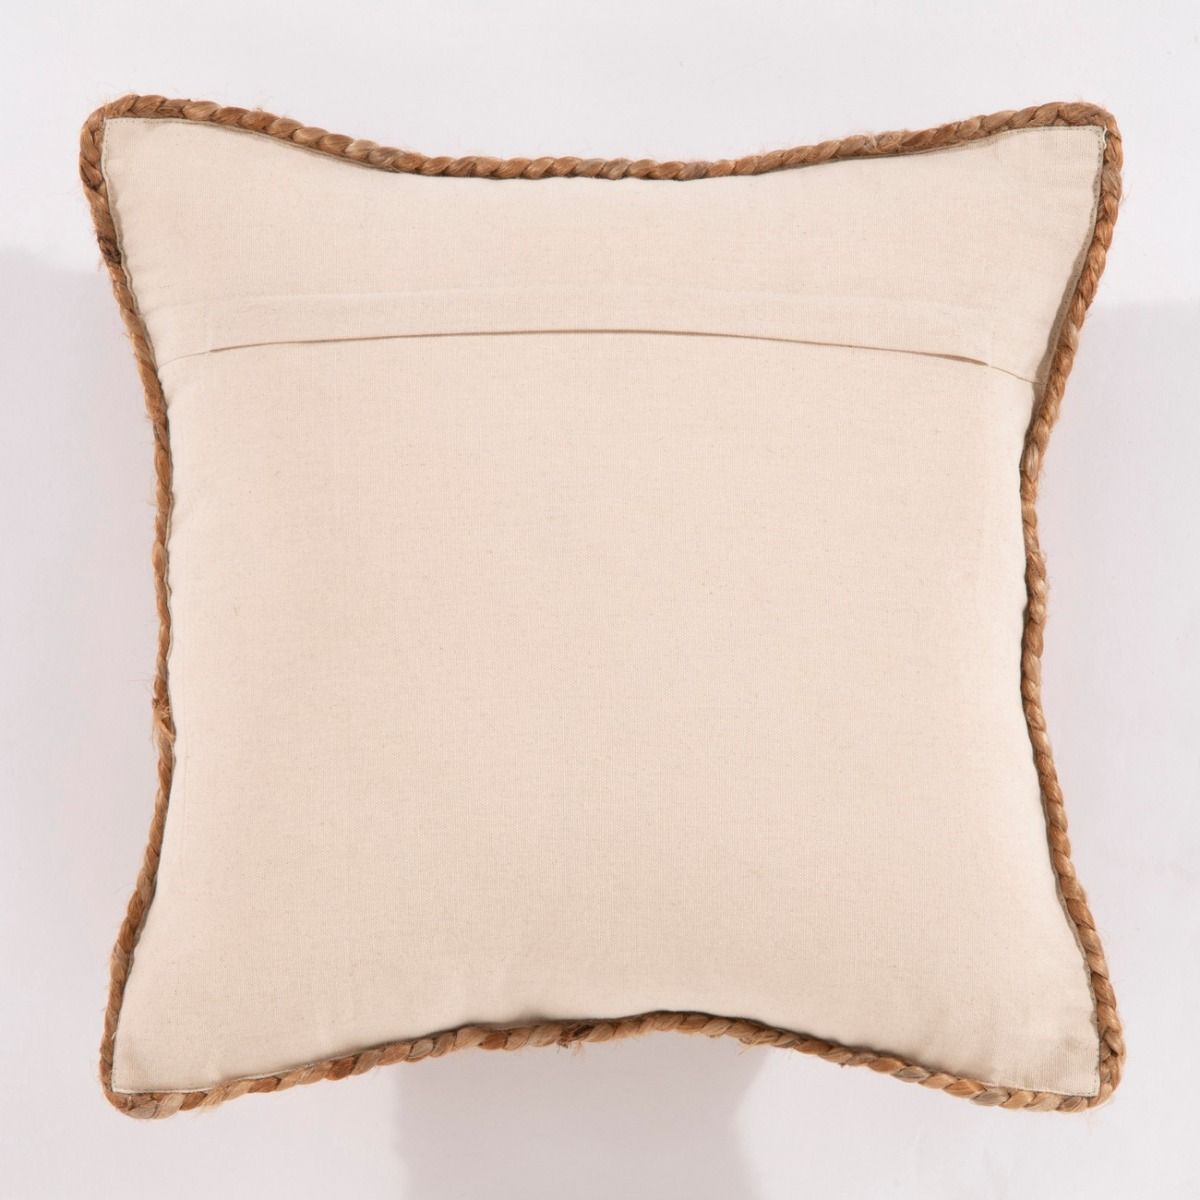 Sherwood Square Jute Natural Cushion, 45x45cm by Esselle (DD)